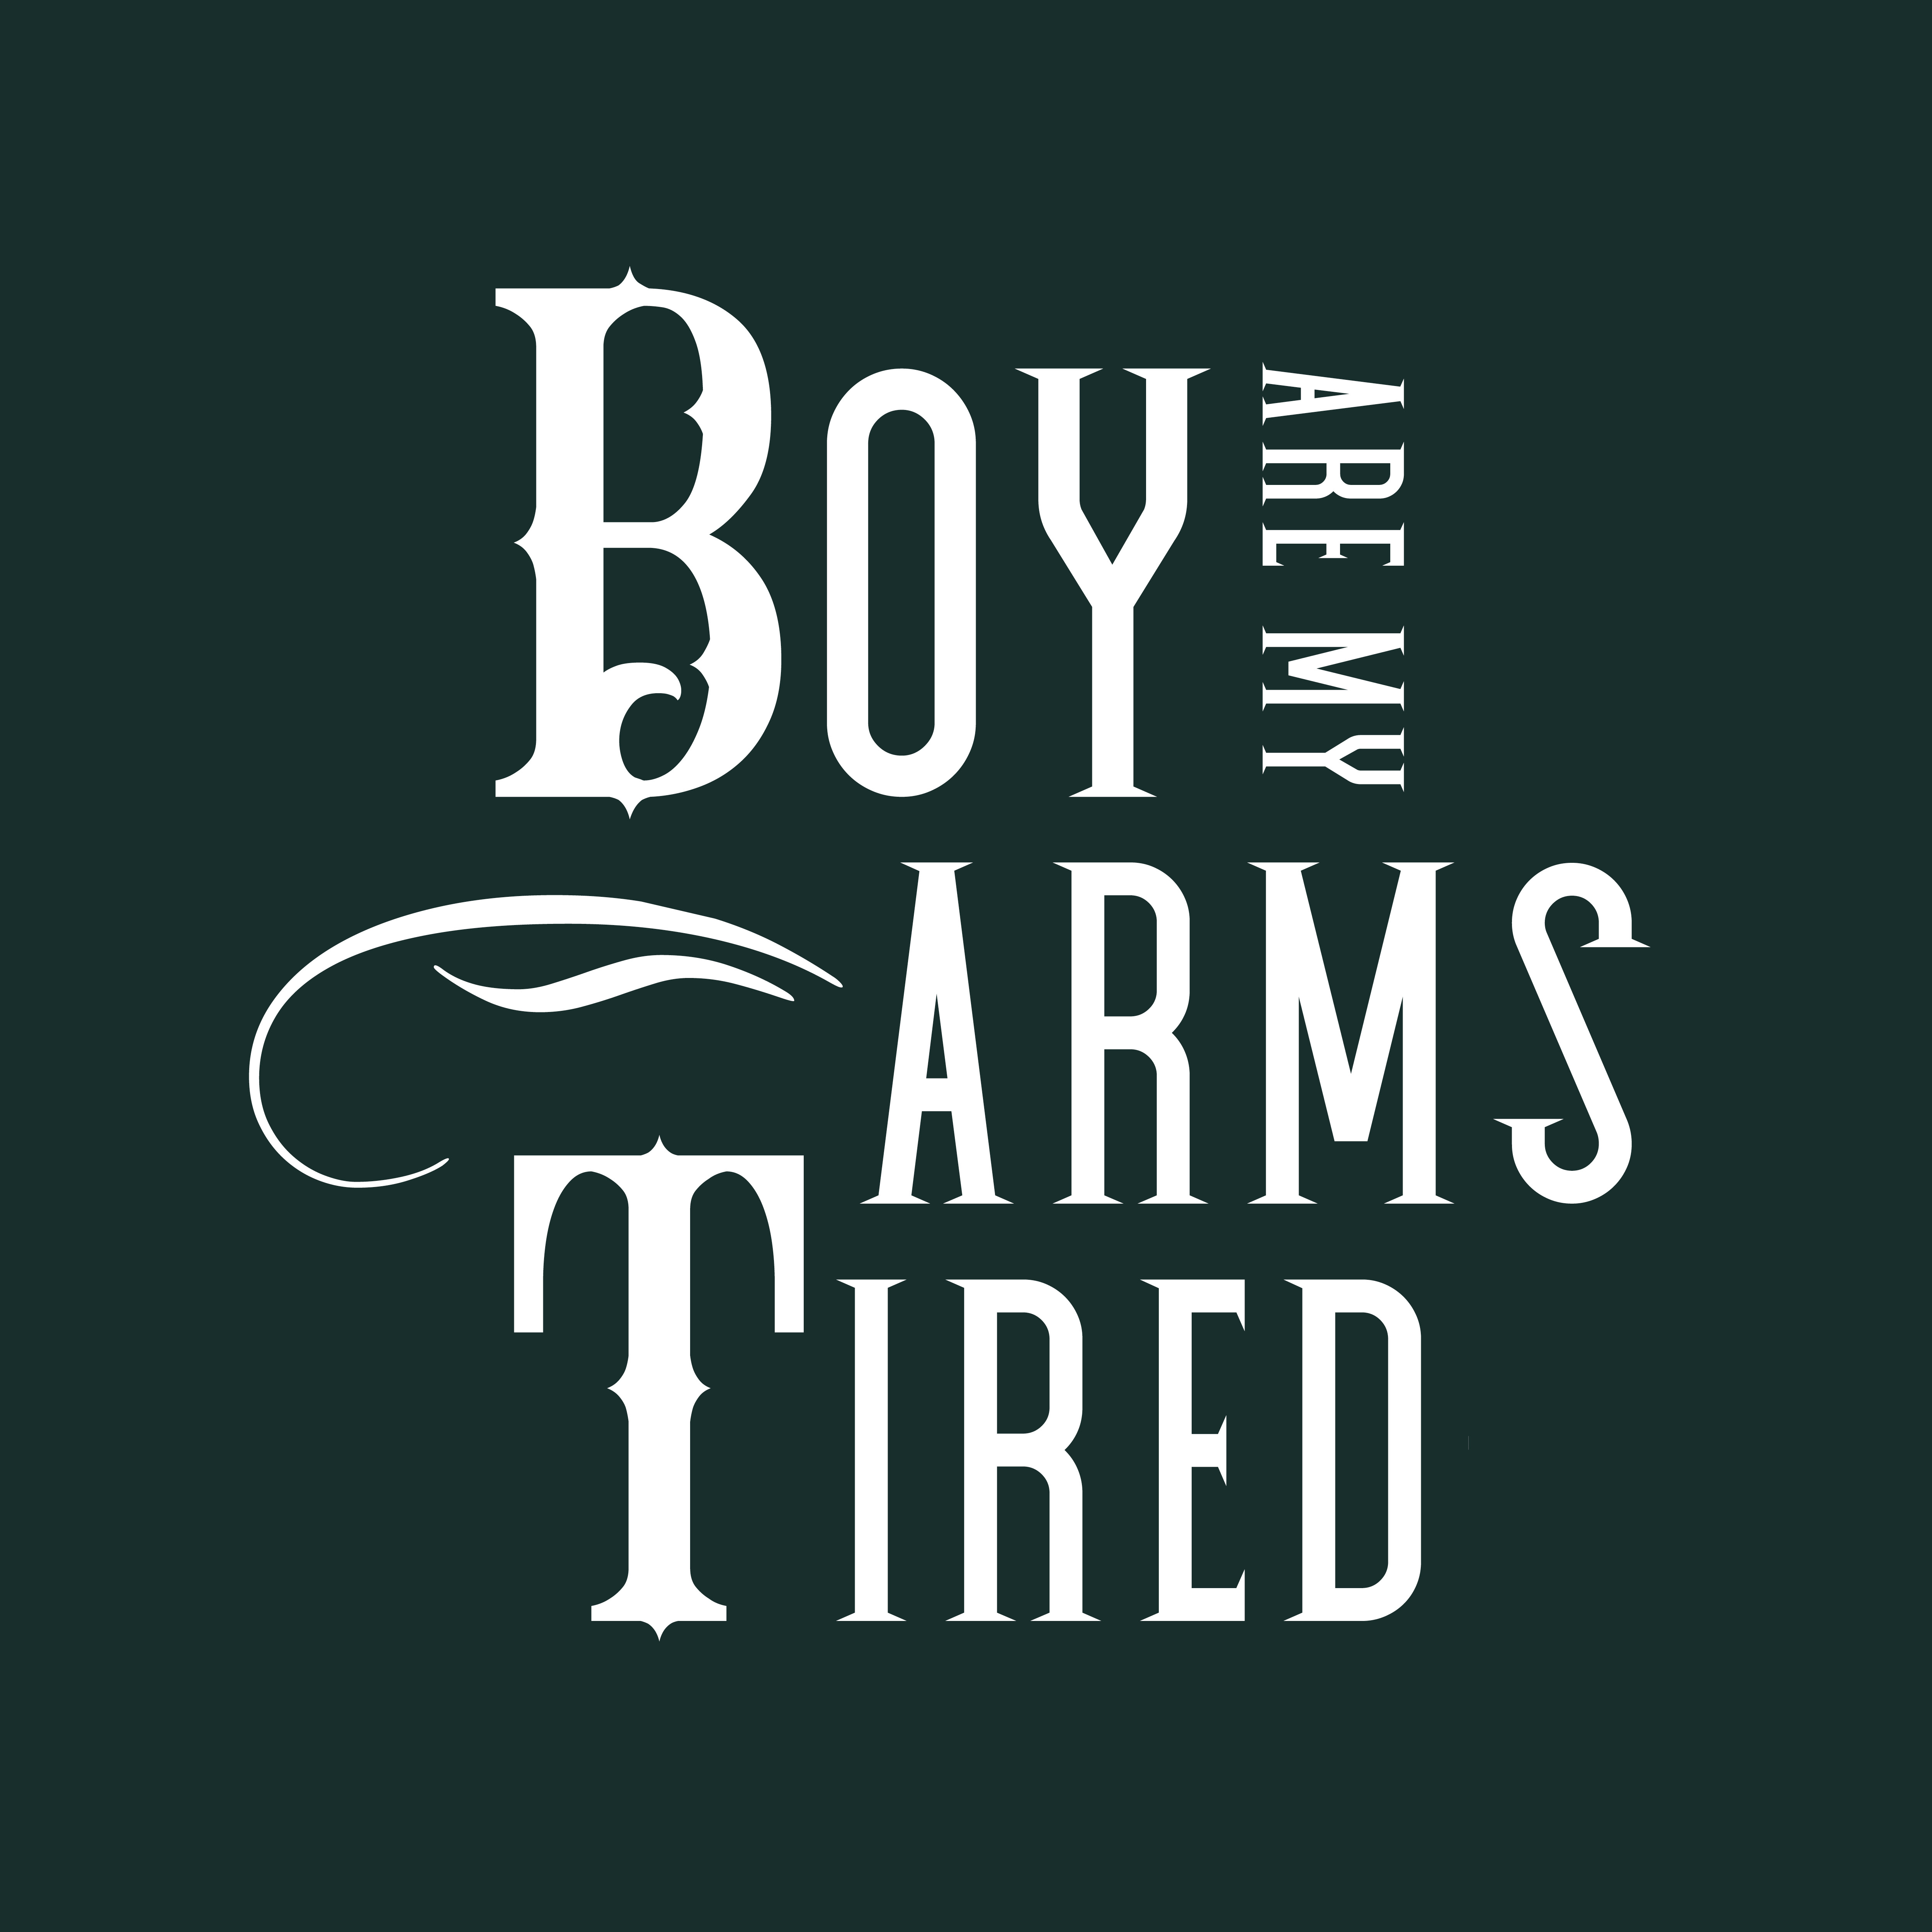 Boy, are my arms tired!